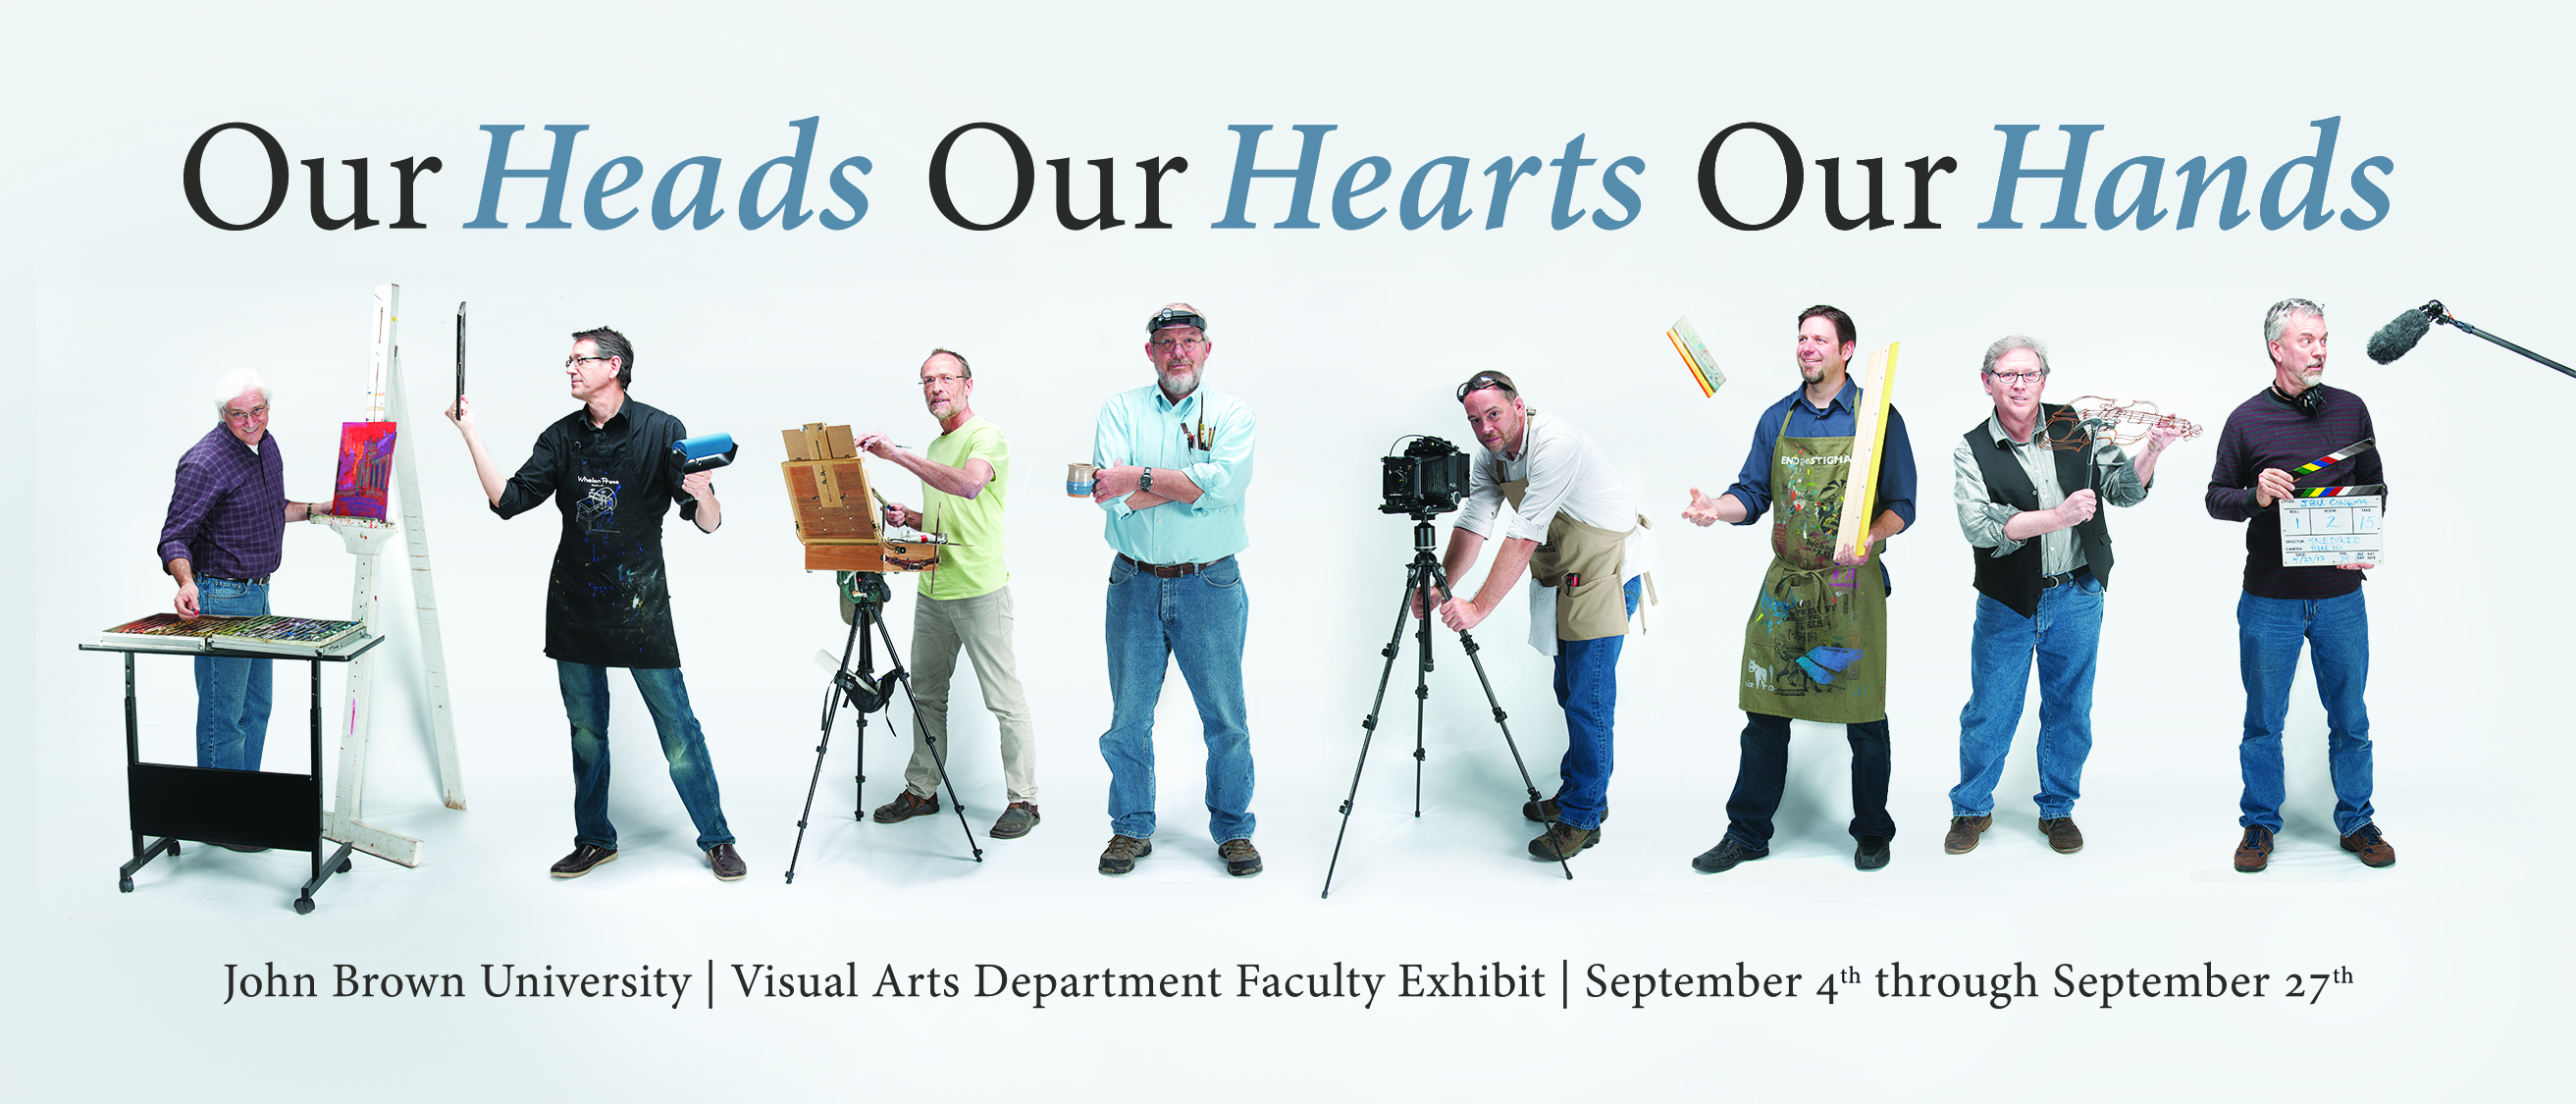 Our Heads, Our Hearts, Our Hands Faculty Exhibit Opens at JBU